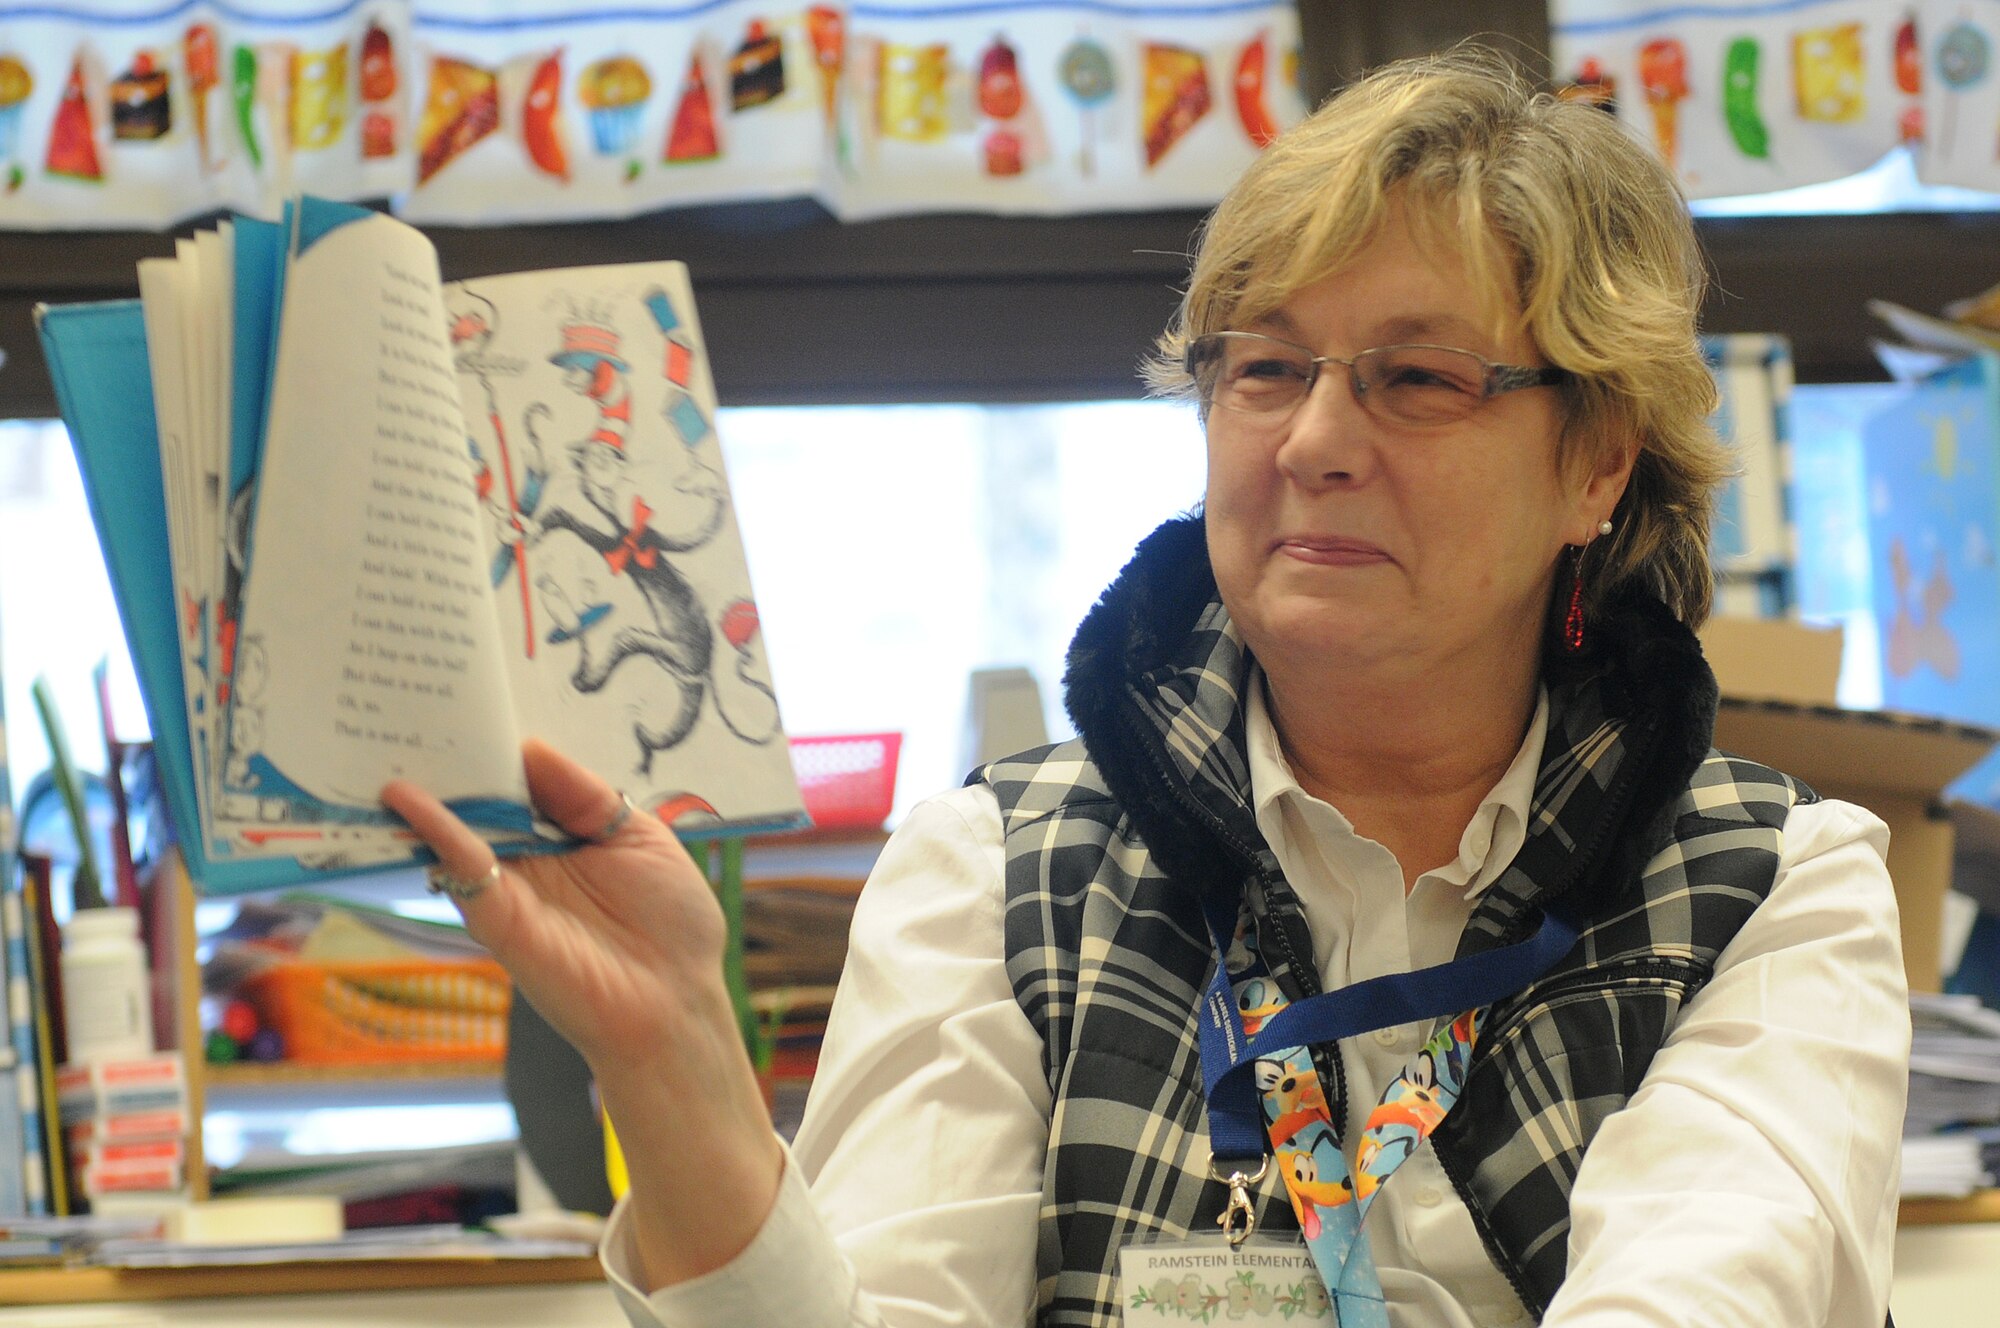 Marianne Warwick reads “The Cat in the Hat” to her first-grade class as part of Read Across America week at Ramstein Elementary School on Ramstein Air Base, Germany, Feb. 25, 2012. Entering its 16th year, Read Across America is a national event, also held at overseas military installations, to educate children of all ages about the importance of reading. (U.S. Air Force photo/Airman 1st Class Holly Cook)